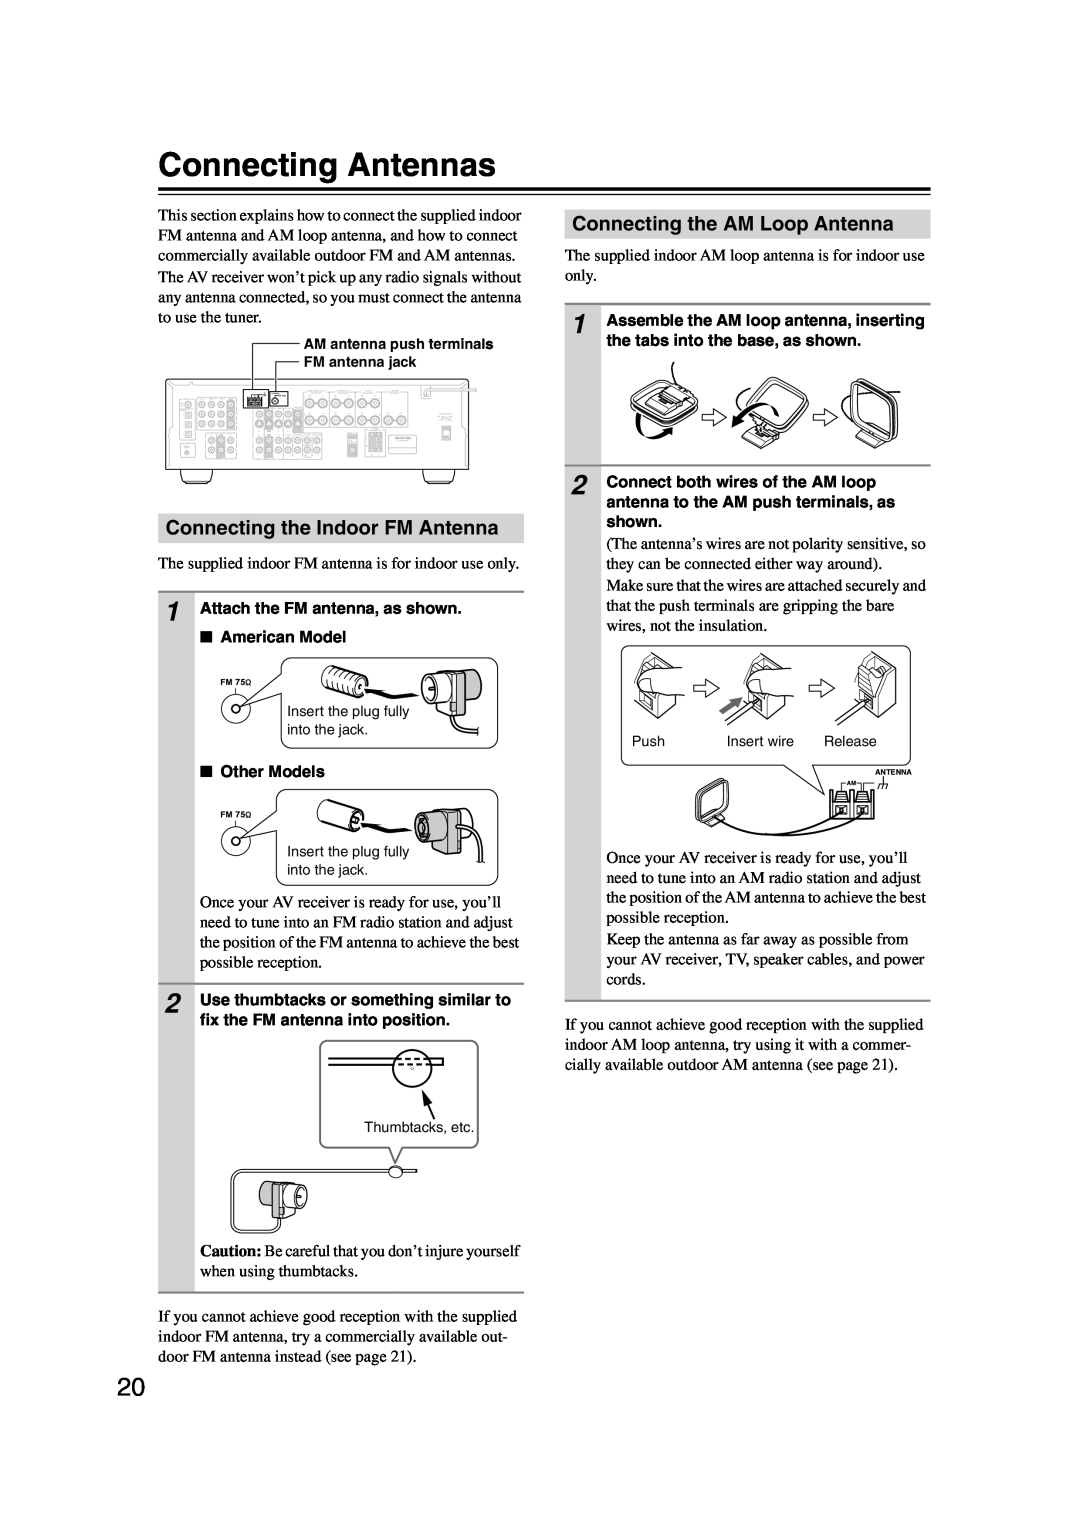 Onkyo HT-S990THX instruction manual Connecting Antennas, Connecting the Indoor FM Antenna, Connecting the AM Loop Antenna 